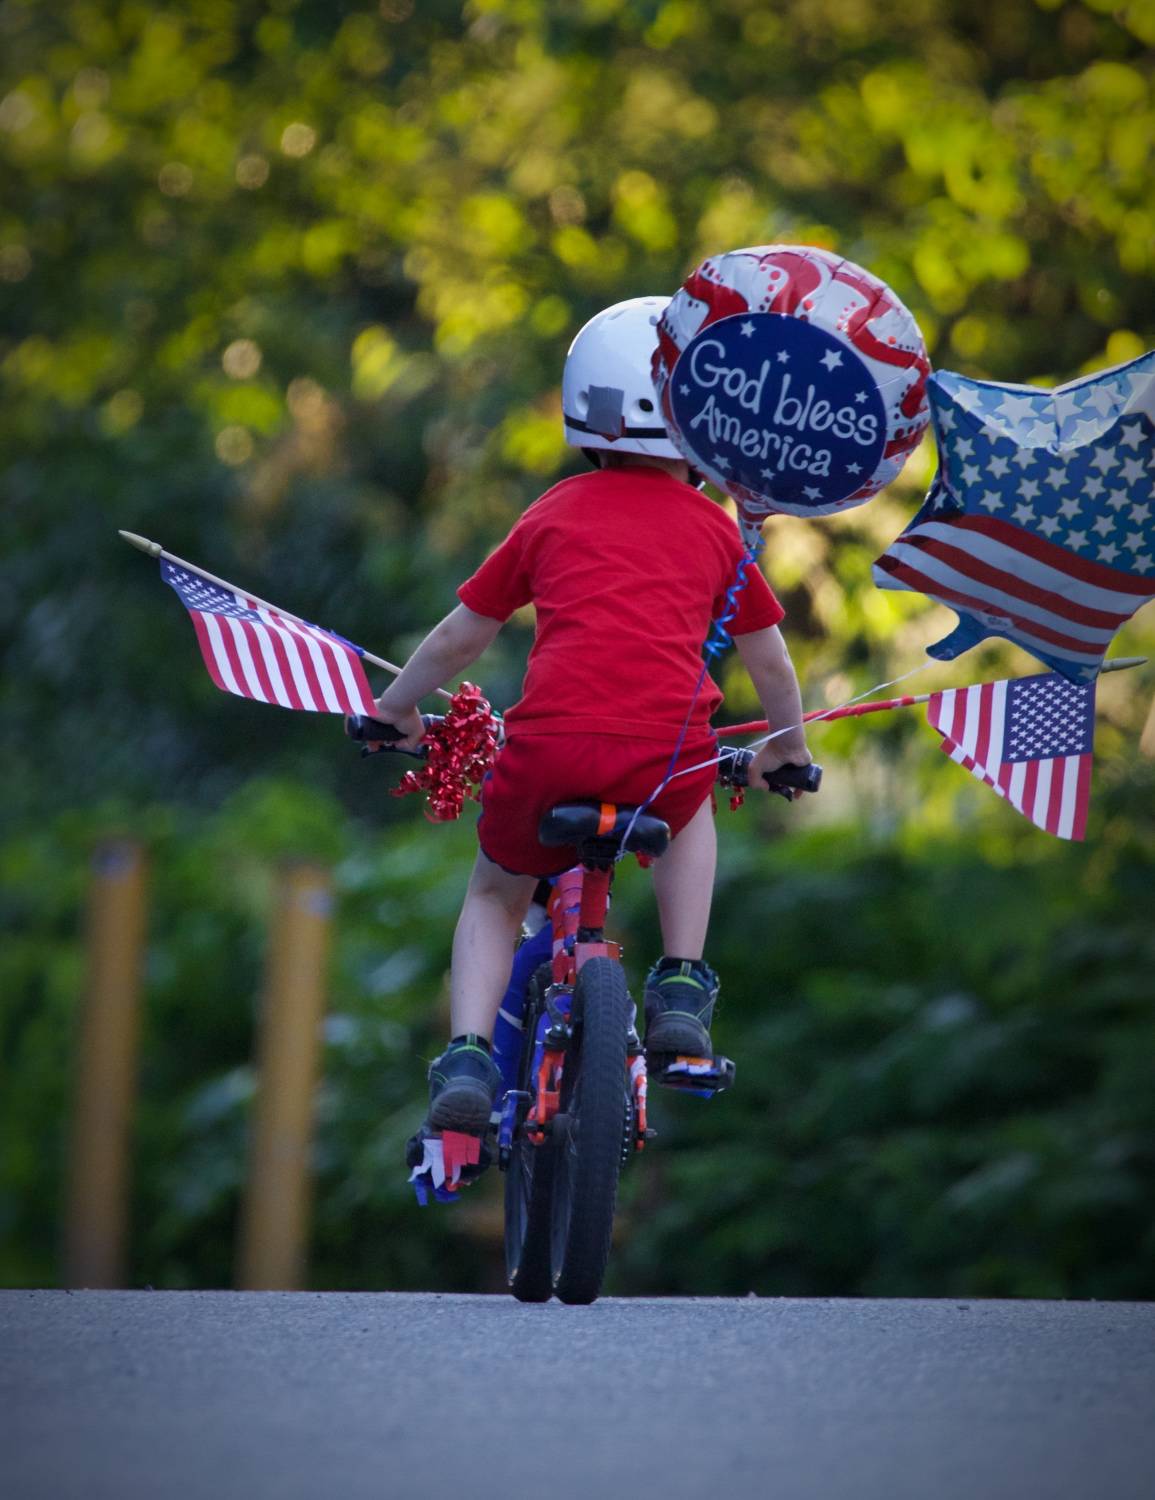 Alex Weiss is pictured riding his bike Wednesday, July 4, 2018. The Weiss family believes the bike, which won first place in the boys’ division of the Most Decorated Bicycle competition, was stolen after the annual Fourth of July parade in Douglas. (Derek Weiss | Courtesy Photo)